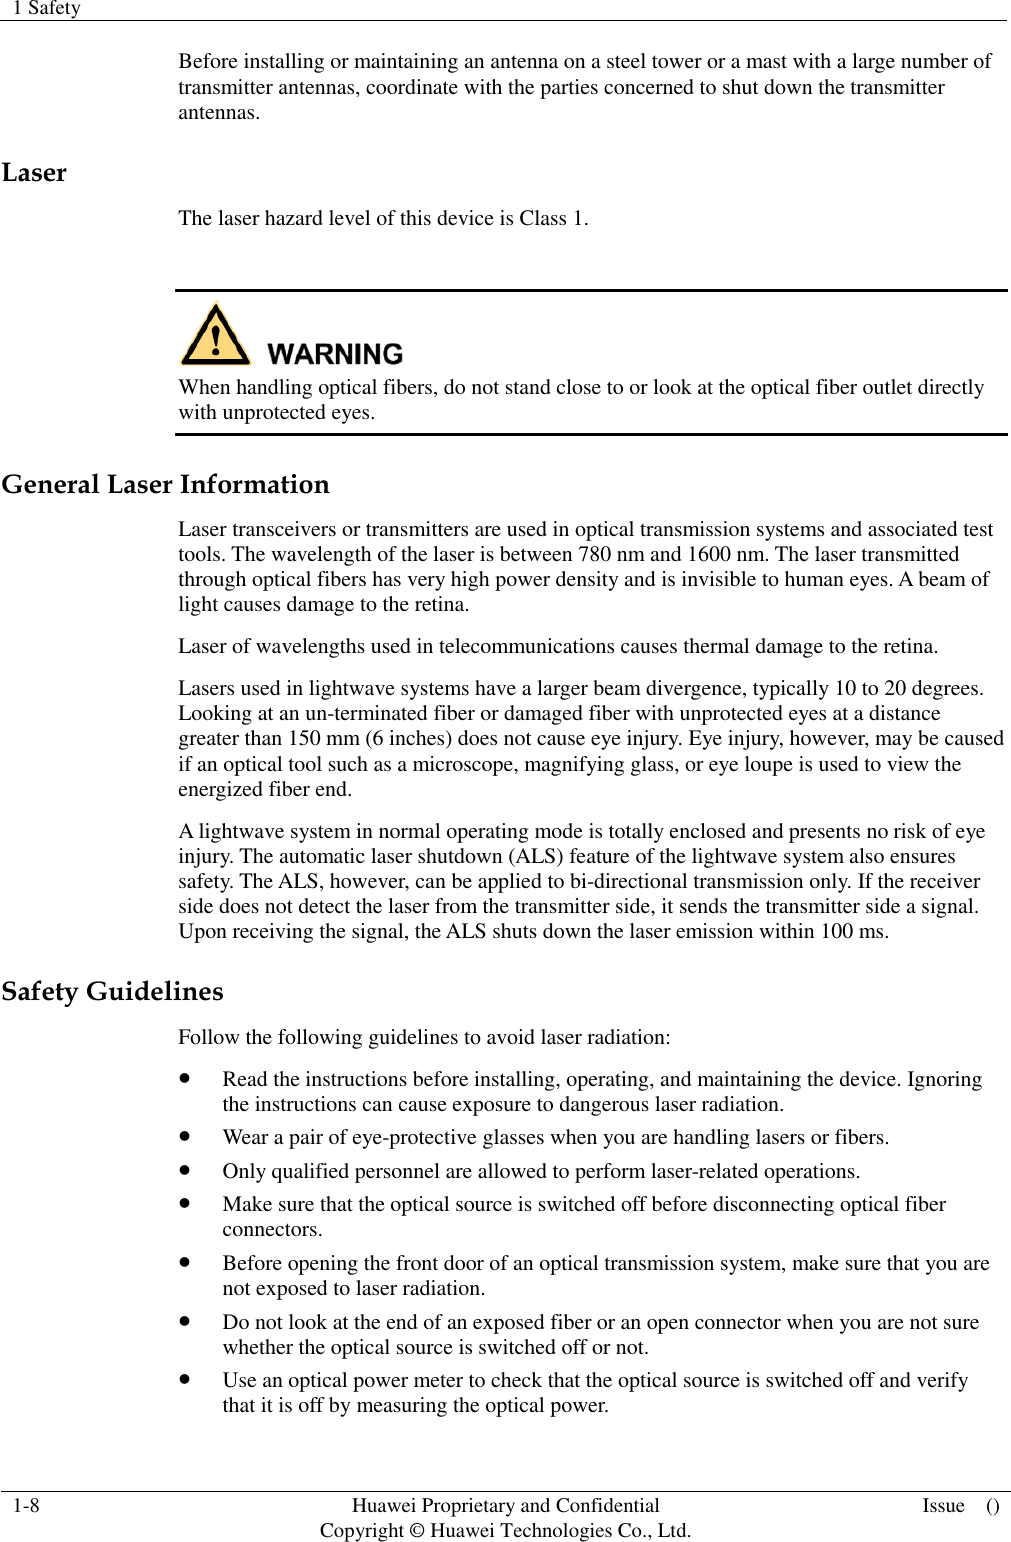 1 Safety    1-8 Huawei Proprietary and Confidential                                     Copyright © Huawei Technologies Co., Ltd. Issue    ()  Before installing or maintaining an antenna on a steel tower or a mast with a large number of transmitter antennas, coordinate with the parties concerned to shut down the transmitter antennas. Laser The laser hazard level of this device is Class 1.   When handling optical fibers, do not stand close to or look at the optical fiber outlet directly with unprotected eyes. General Laser Information Laser transceivers or transmitters are used in optical transmission systems and associated test tools. The wavelength of the laser is between 780 nm and 1600 nm. The laser transmitted through optical fibers has very high power density and is invisible to human eyes. A beam of light causes damage to the retina. Laser of wavelengths used in telecommunications causes thermal damage to the retina. Lasers used in lightwave systems have a larger beam divergence, typically 10 to 20 degrees. Looking at an un-terminated fiber or damaged fiber with unprotected eyes at a distance greater than 150 mm (6 inches) does not cause eye injury. Eye injury, however, may be caused if an optical tool such as a microscope, magnifying glass, or eye loupe is used to view the energized fiber end. A lightwave system in normal operating mode is totally enclosed and presents no risk of eye injury. The automatic laser shutdown (ALS) feature of the lightwave system also ensures safety. The ALS, however, can be applied to bi-directional transmission only. If the receiver side does not detect the laser from the transmitter side, it sends the transmitter side a signal. Upon receiving the signal, the ALS shuts down the laser emission within 100 ms. Safety Guidelines Follow the following guidelines to avoid laser radiation:  Read the instructions before installing, operating, and maintaining the device. Ignoring the instructions can cause exposure to dangerous laser radiation.  Wear a pair of eye-protective glasses when you are handling lasers or fibers.  Only qualified personnel are allowed to perform laser-related operations.  Make sure that the optical source is switched off before disconnecting optical fiber connectors.  Before opening the front door of an optical transmission system, make sure that you are not exposed to laser radiation.  Do not look at the end of an exposed fiber or an open connector when you are not sure whether the optical source is switched off or not.  Use an optical power meter to check that the optical source is switched off and verify that it is off by measuring the optical power. 